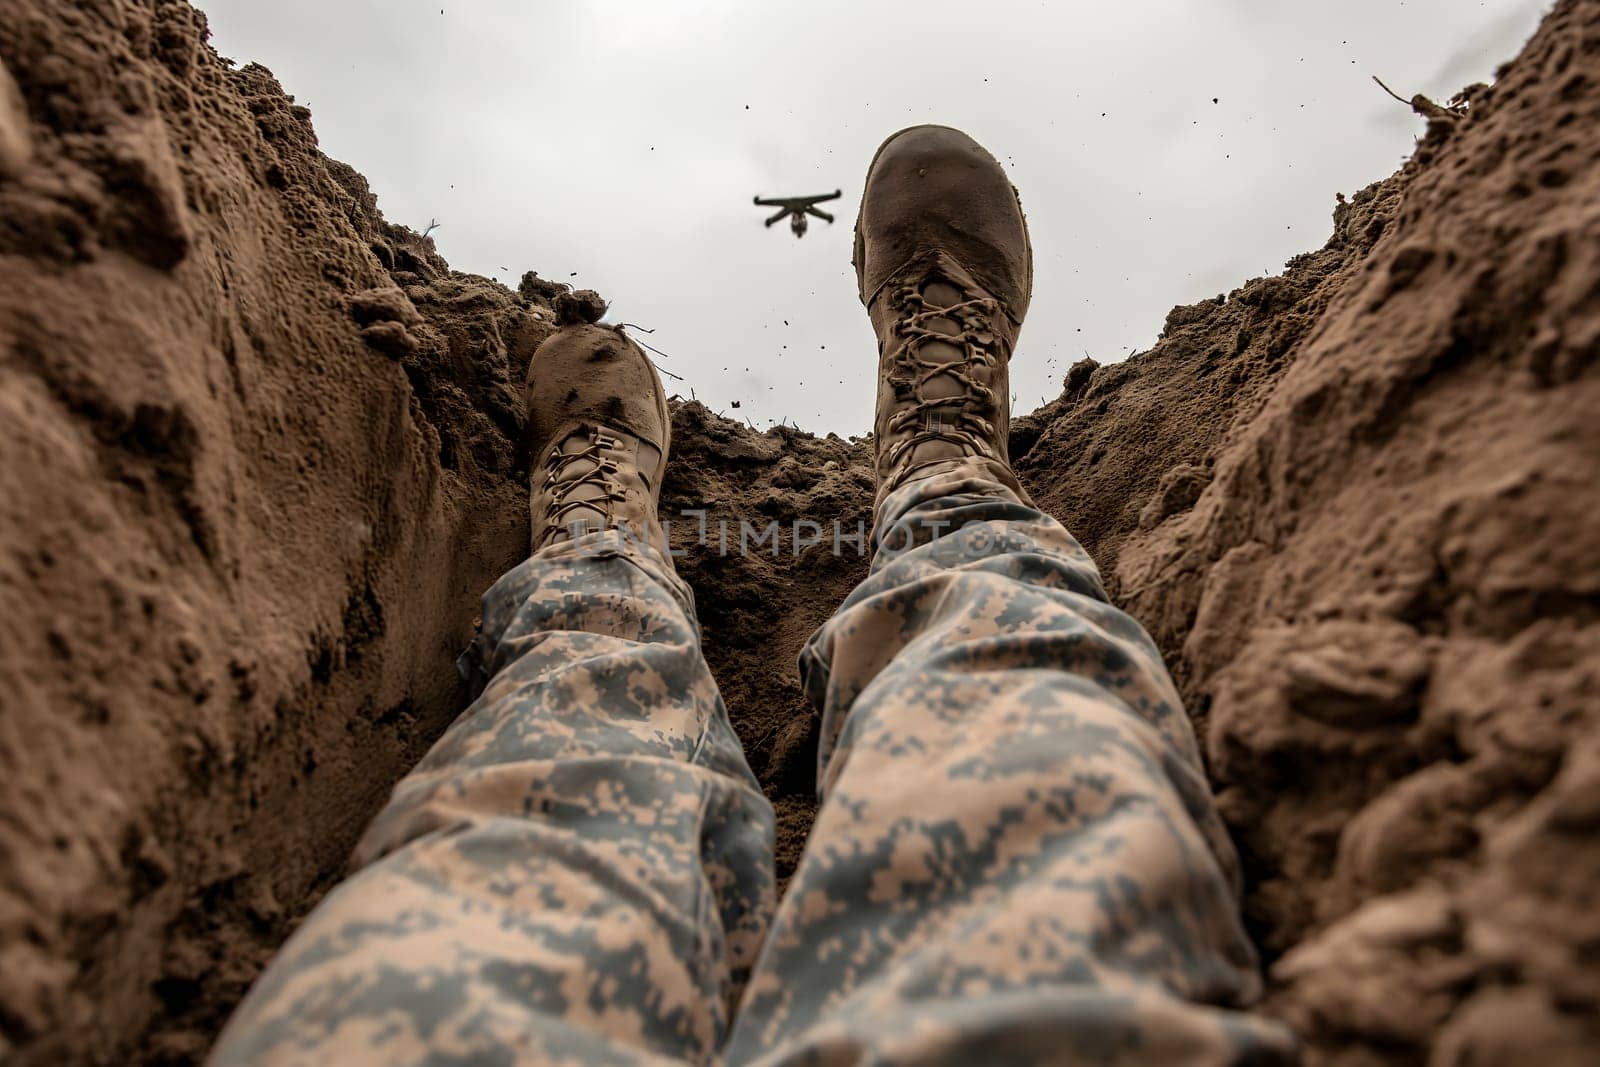 soldier legs laying on the dirt with flying drone in the sky above by z1b